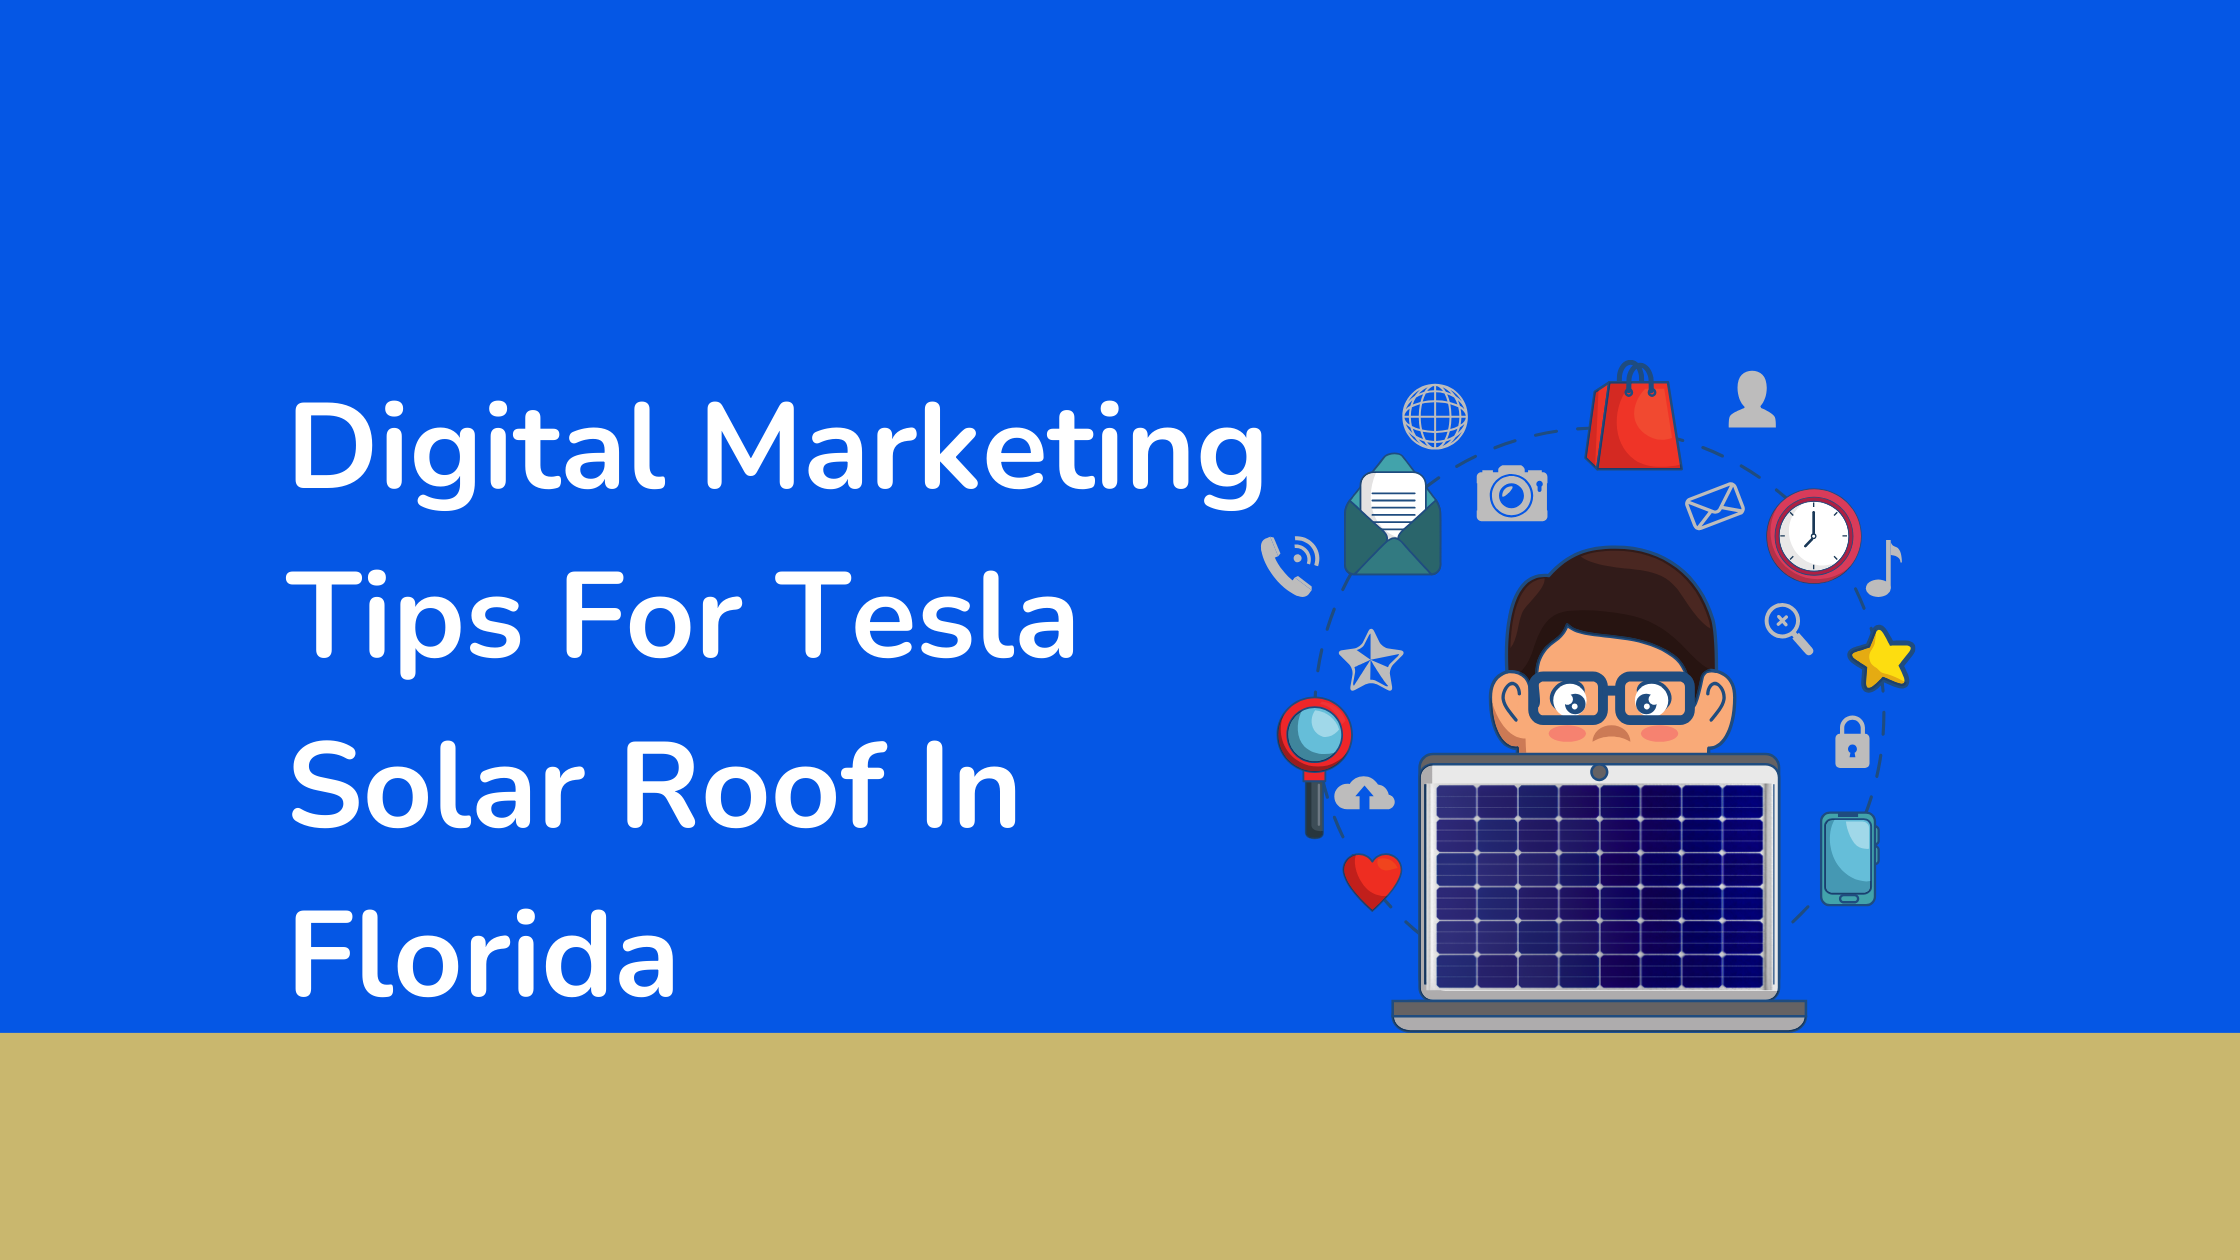 Man at desk with laptop, solar panel leaning against wall. Text: "Digital Marketing Tips for Tesla Solar Roof in Florida